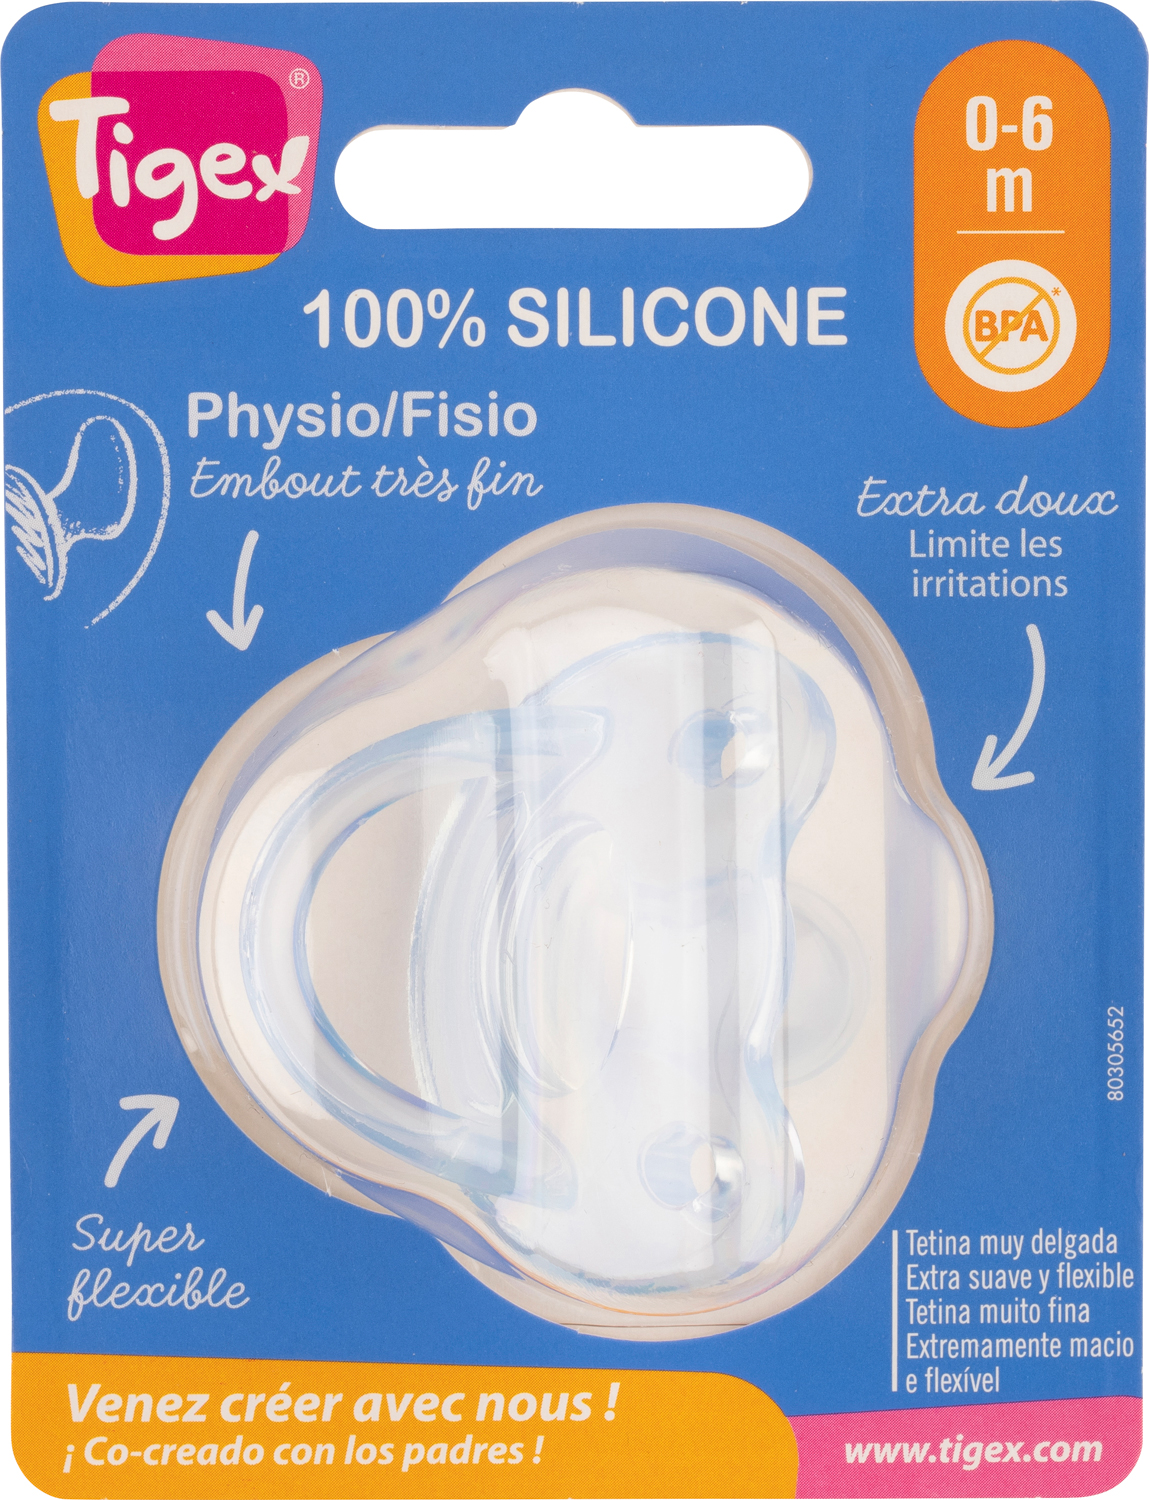 Sucette physiologique silicone Funny Animals 18 à 36 mois BEBE